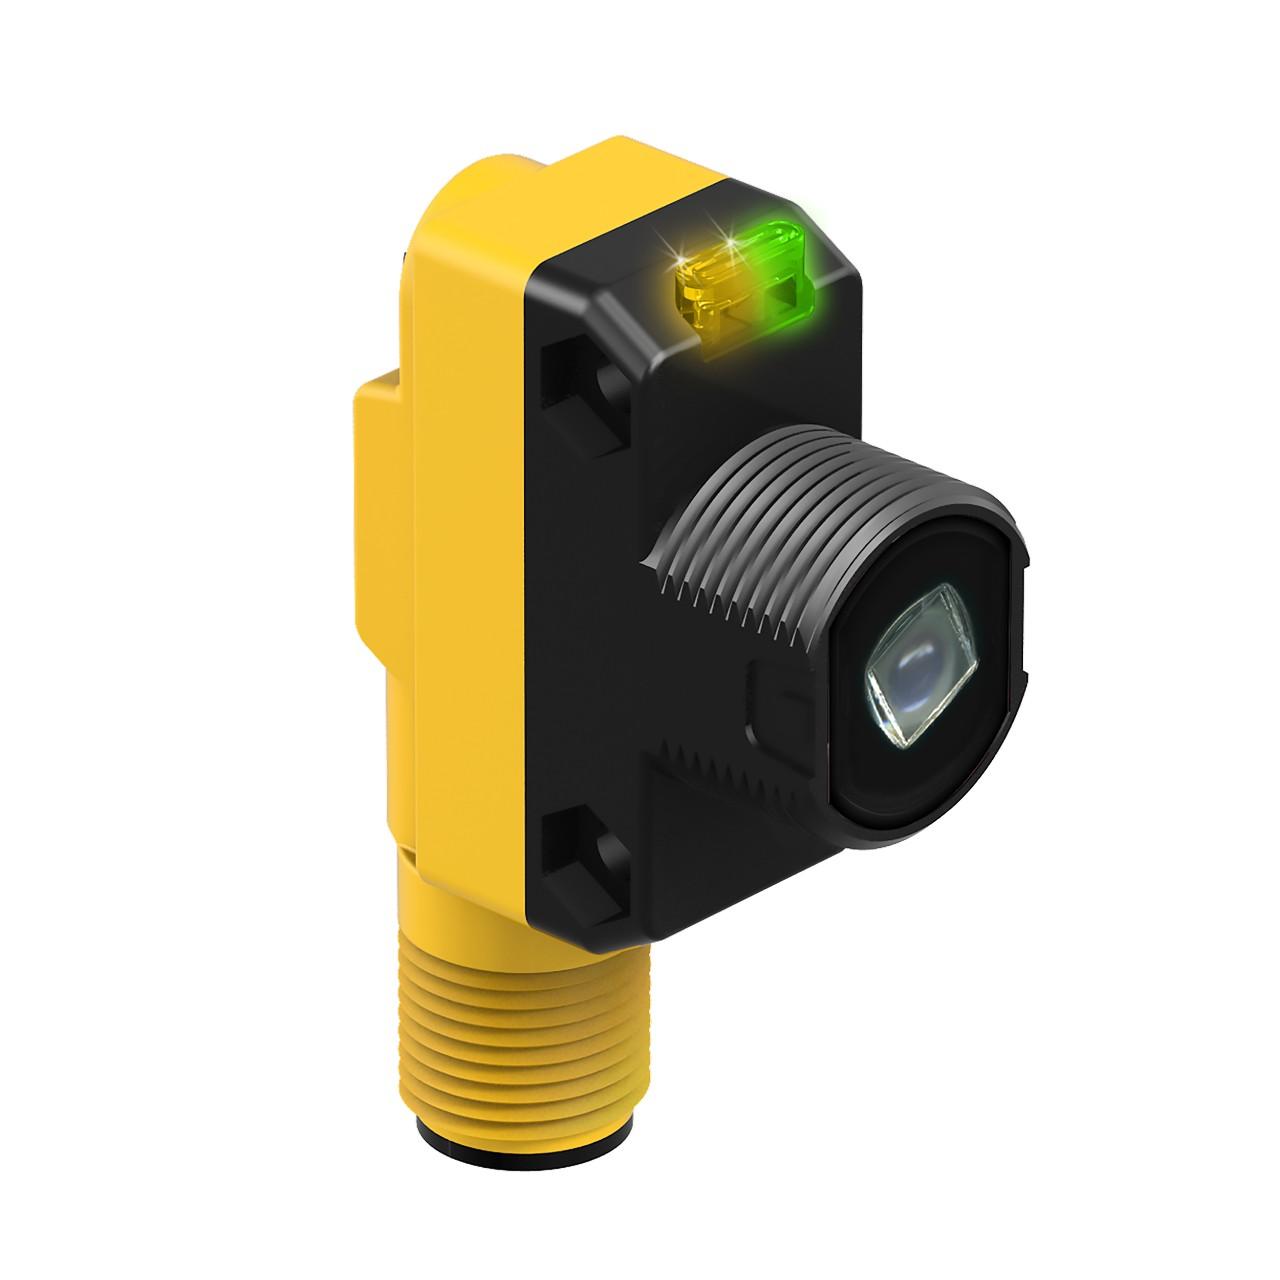 Banner QS186LEQ8 Class 1 Laser photo-electric emitter with through-beam system / opposed mode - Banner Engineering (WORLD-BEAM series - QS186LE series) - Part #70253 - Visible red light (650nm) - Supply voltage 10Vdc-30Vdc (12Vdc / 24Vdc nom.) - Pre-equipped with 4-pin Eu